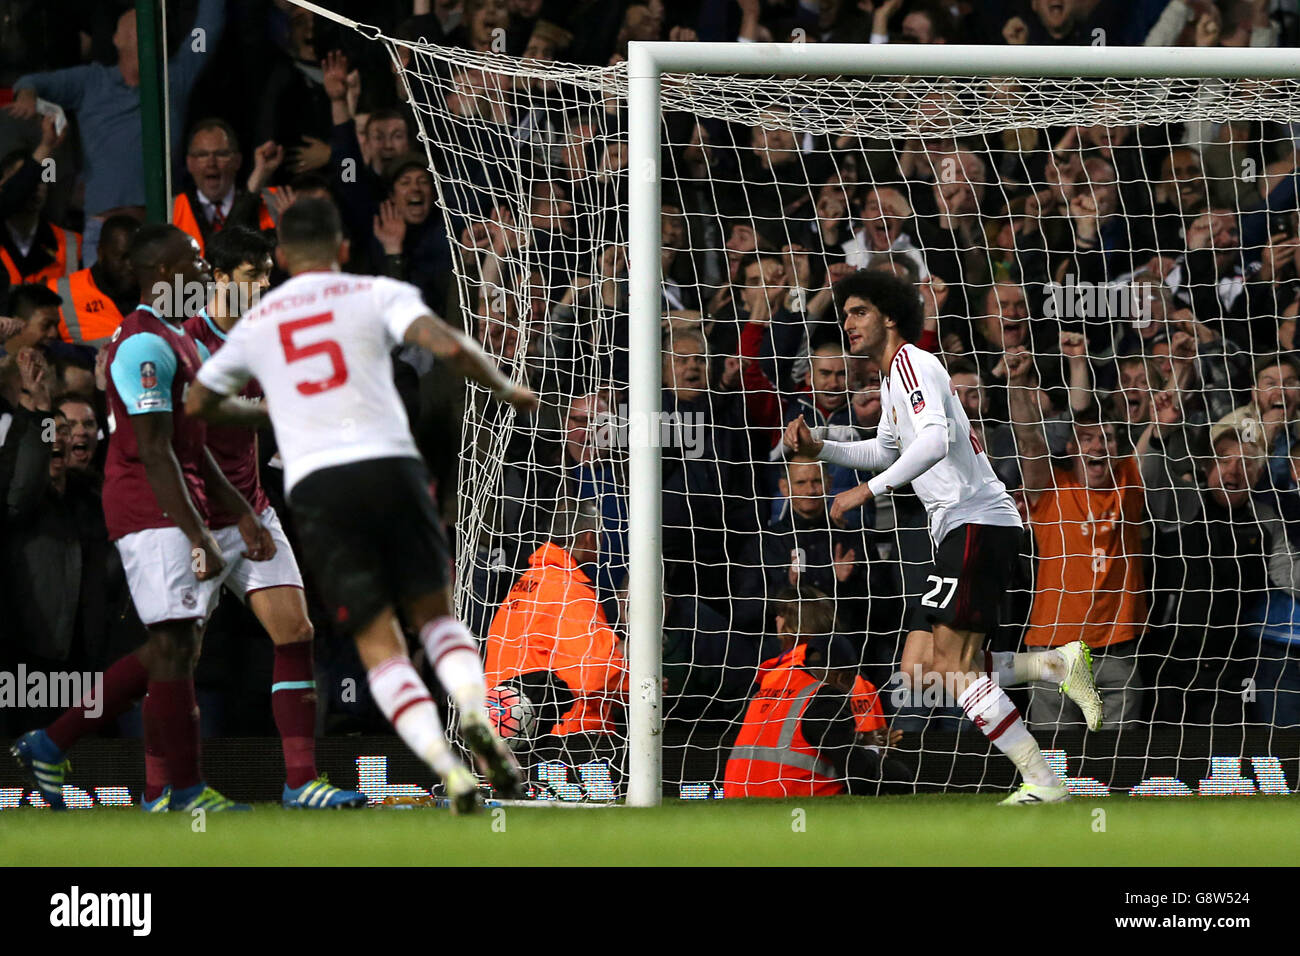 Manchester United's Marouane Fellaini (right) celebrates scoring their second goal of the game during the Emirates FA Cup, Quarter Final Replay match at Upton Park, London. Stock Photo